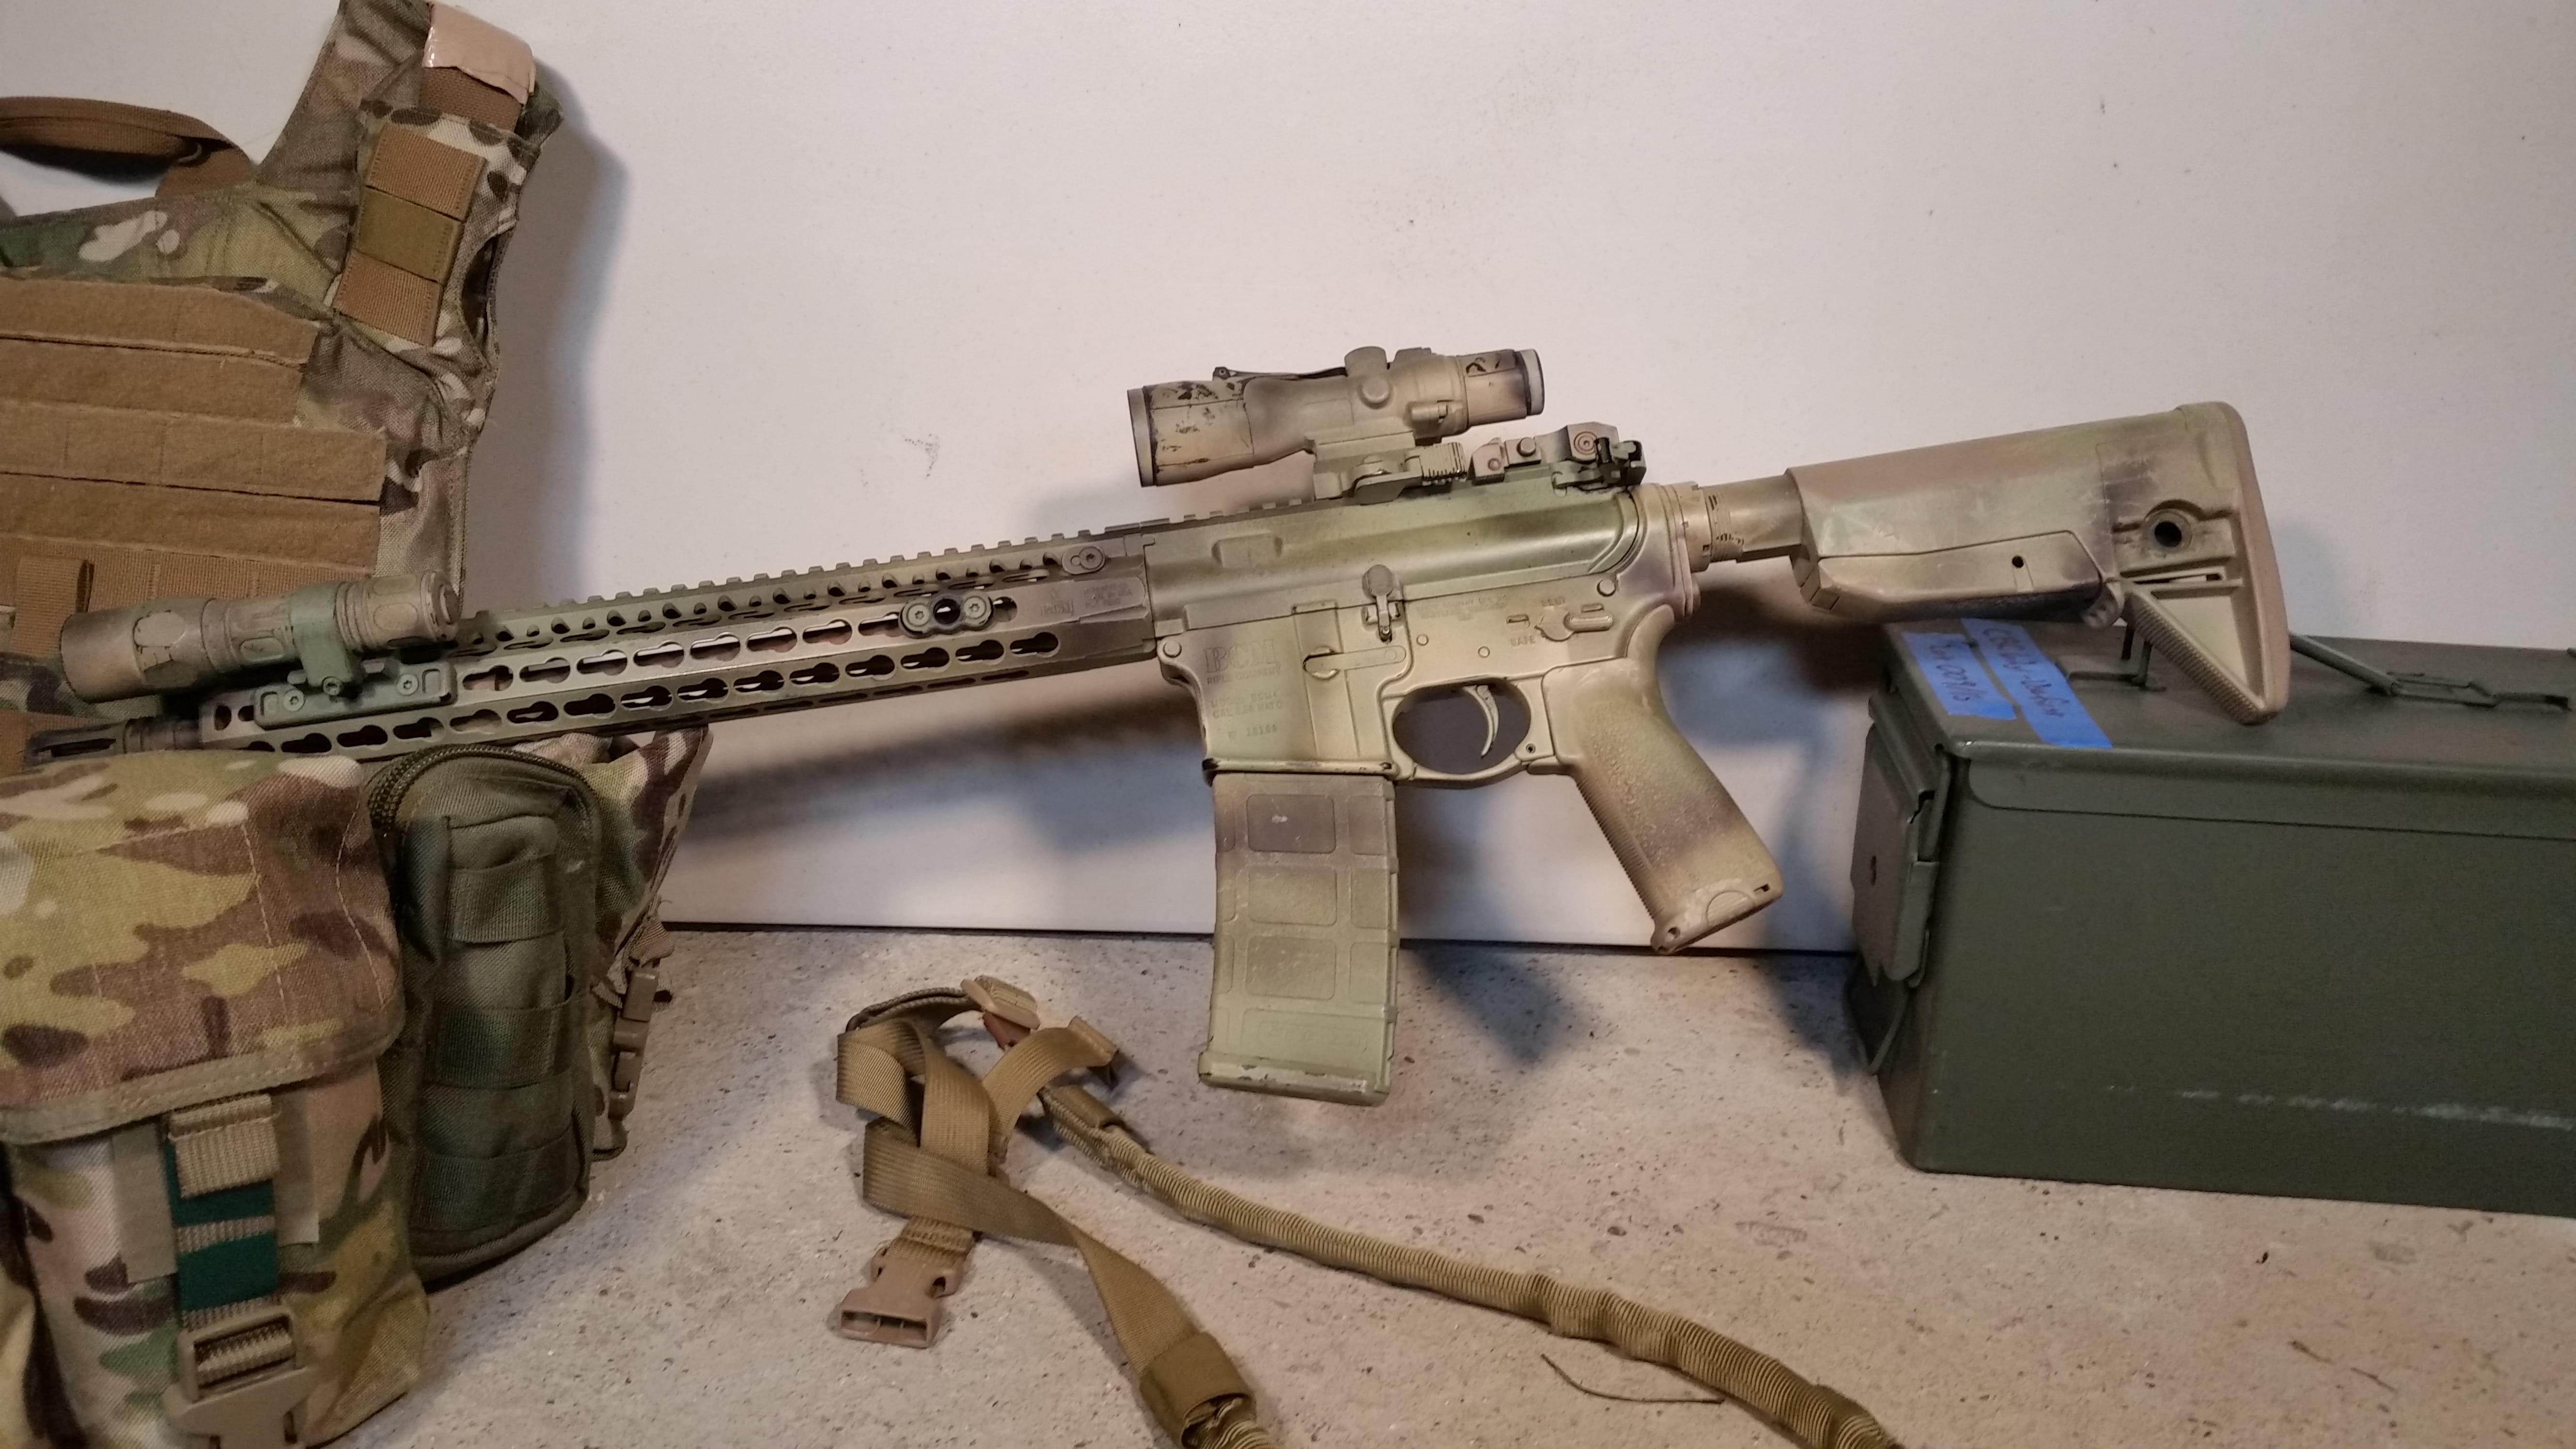 Choosing a good general purpose AR15 fighting rifle is important